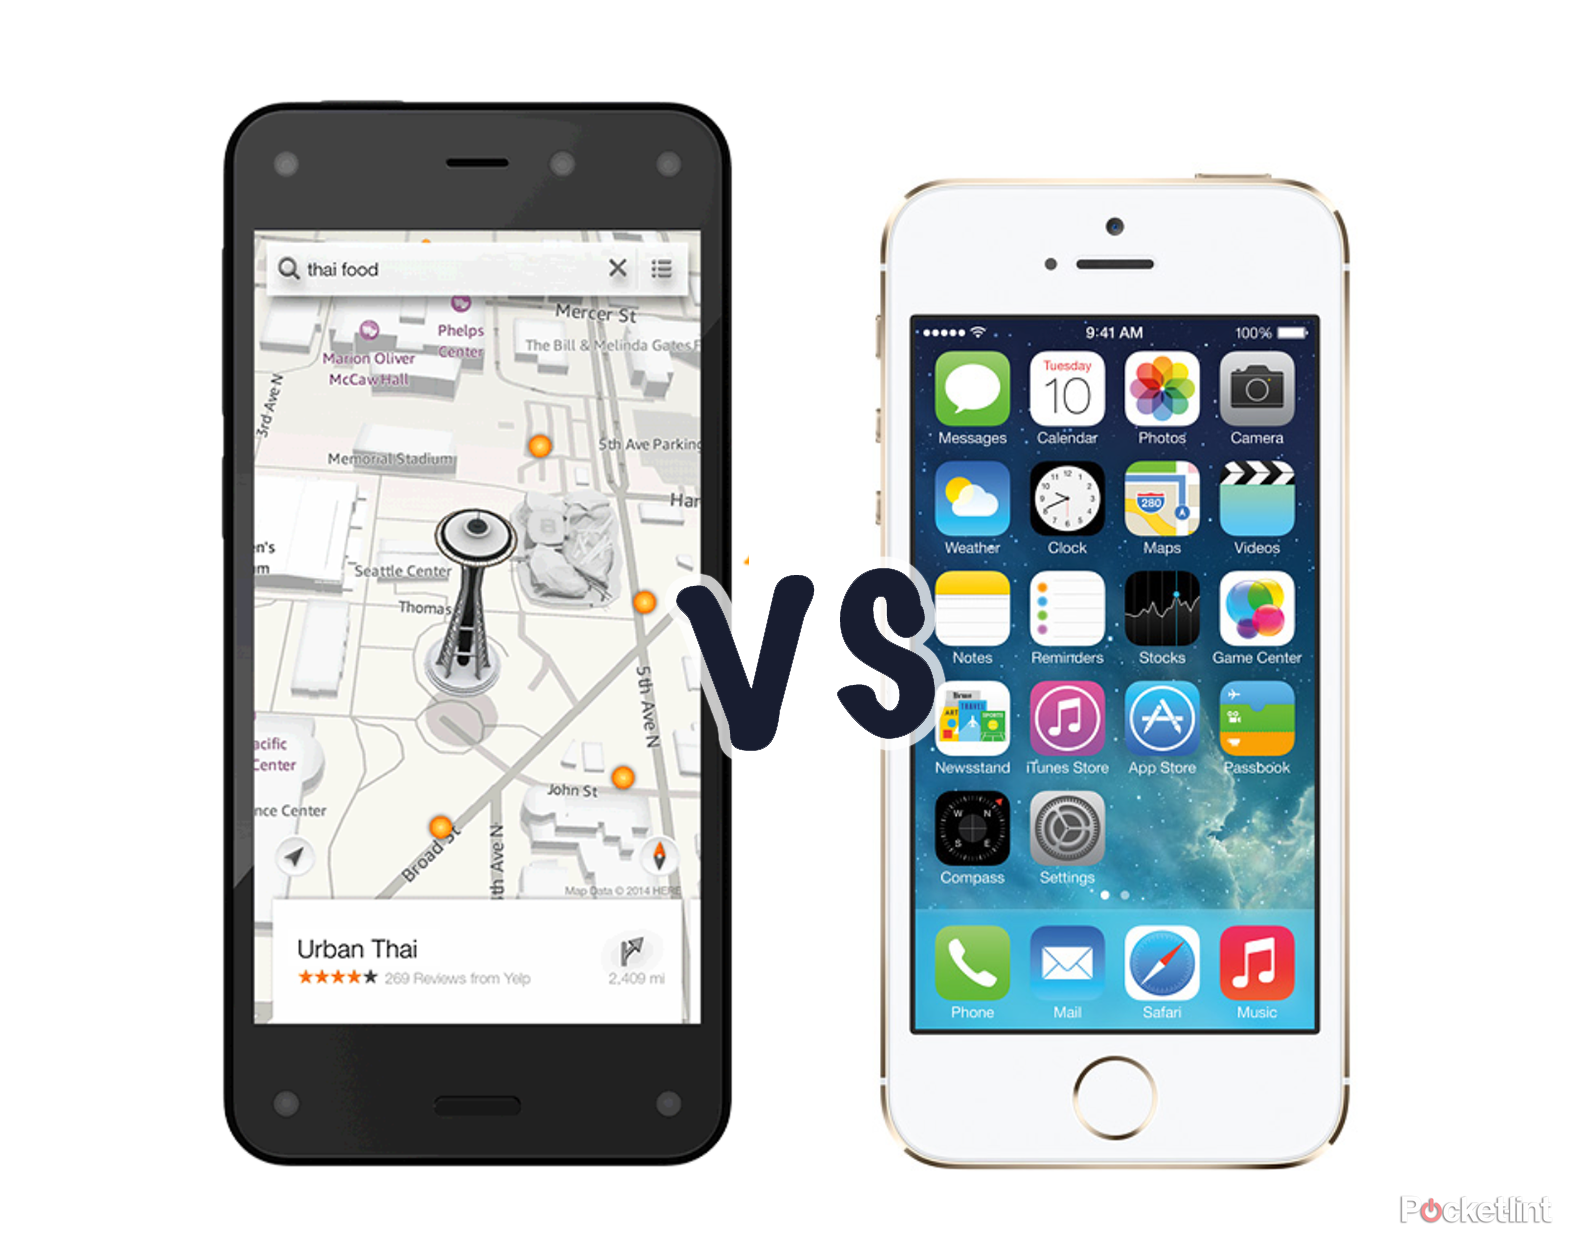 amazon fire phone vs iphone 5s what s the difference  image 1